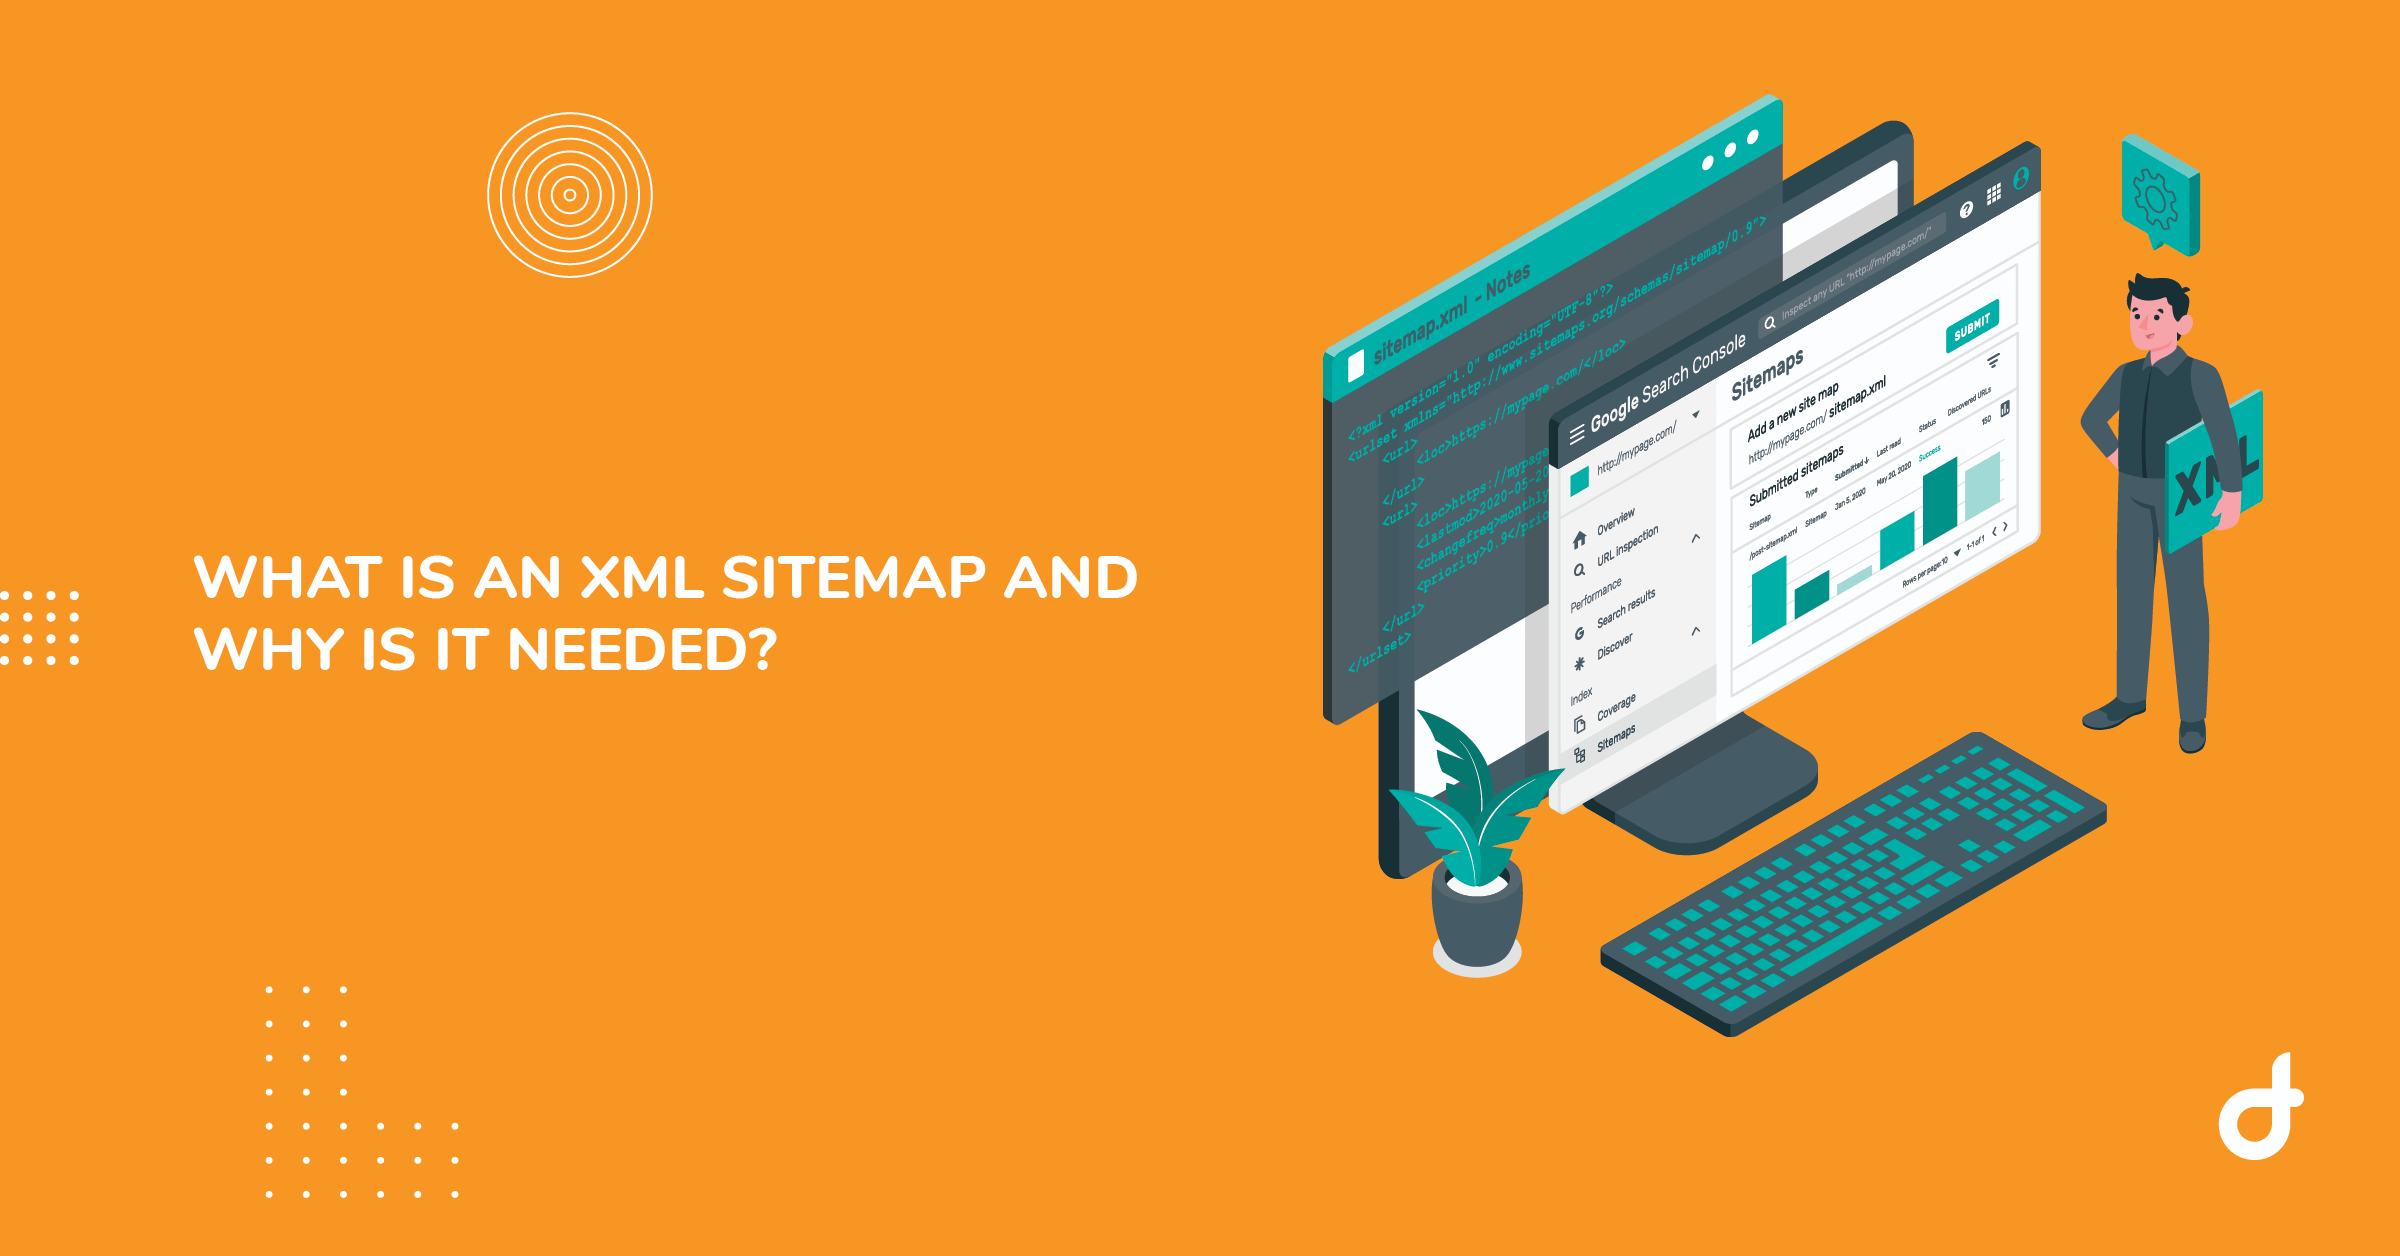 What Is An XML Sitemap And Why Is It Needed?